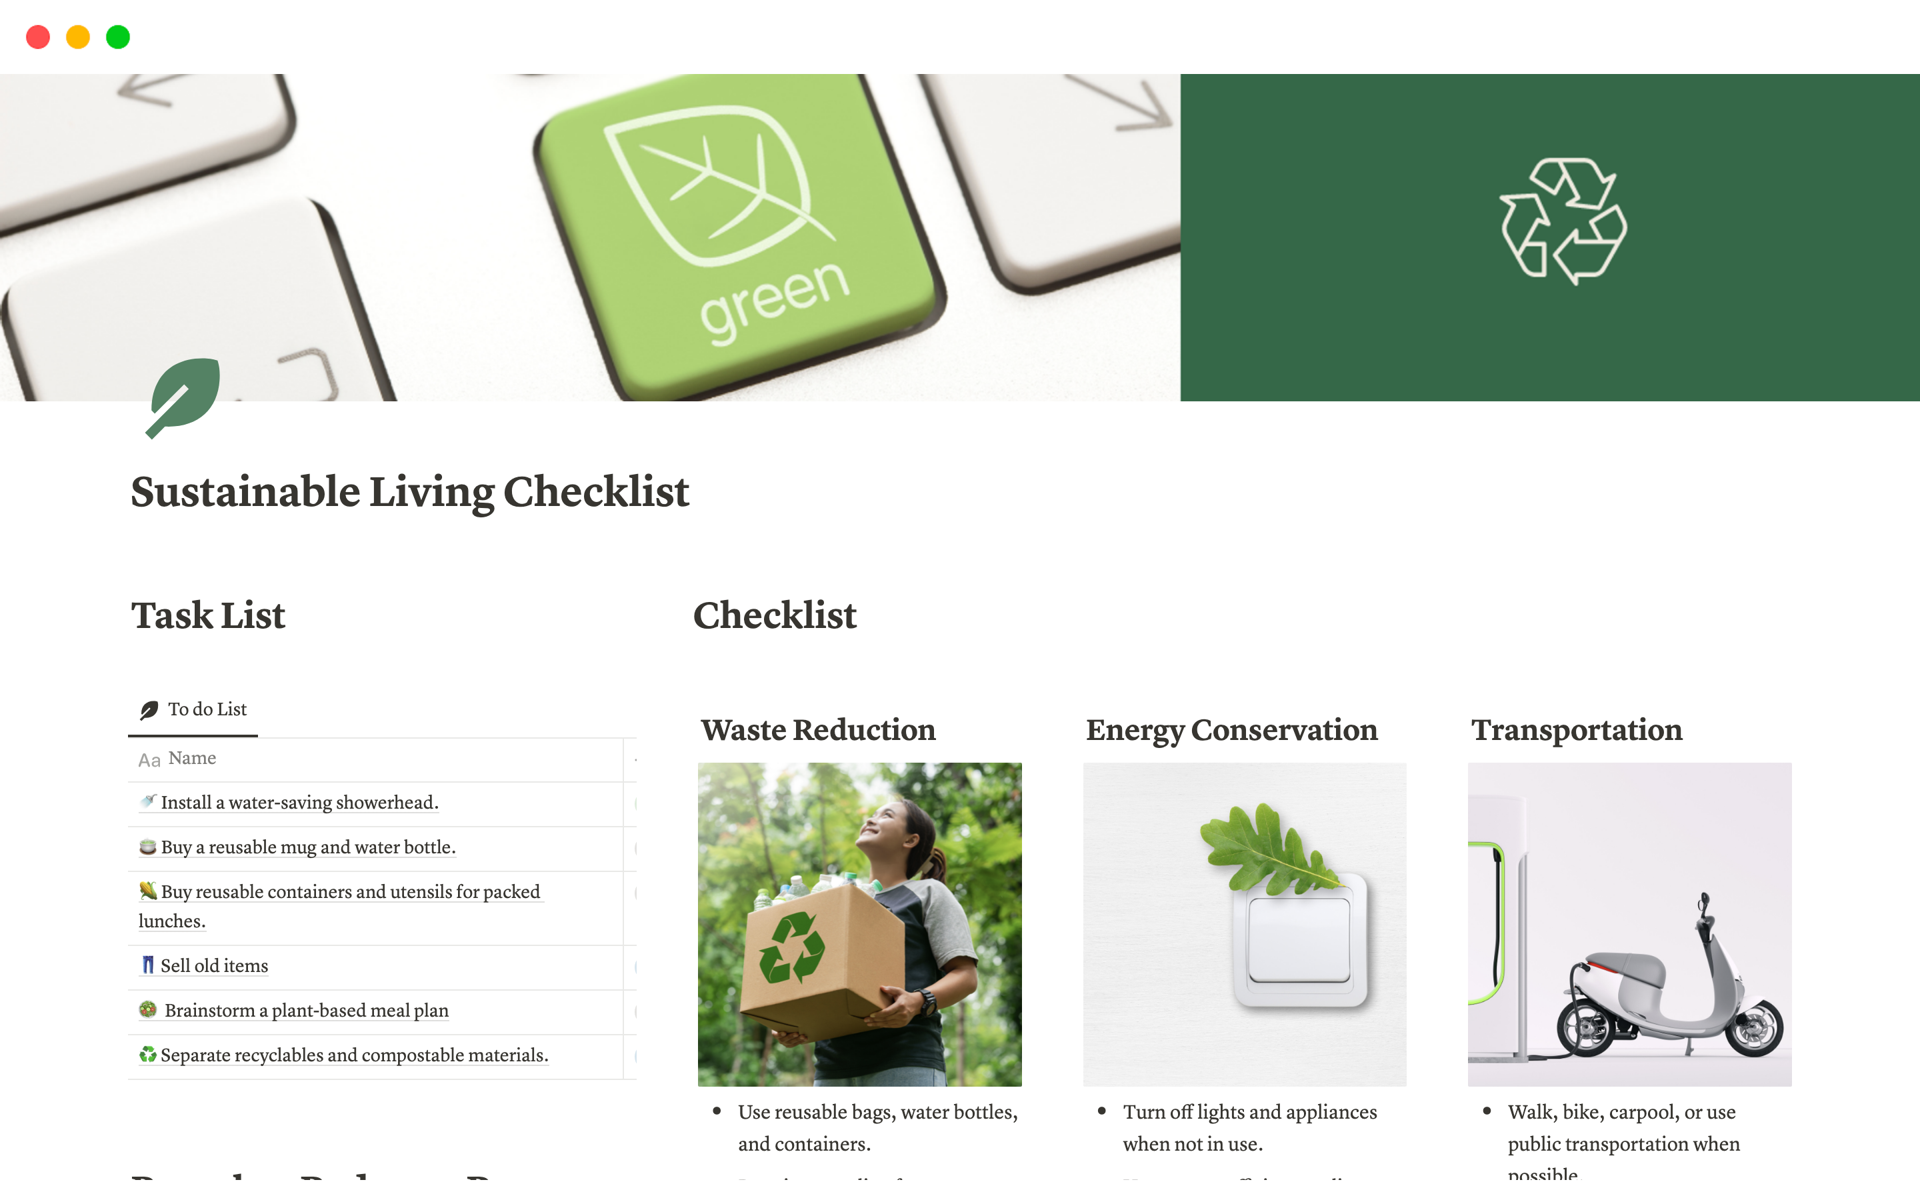 Features: Task List for Energy-Saving Chores and DIY Projects | Recycle + Reduce + Reuse Database | Eco-Friendly Goals Checklist

